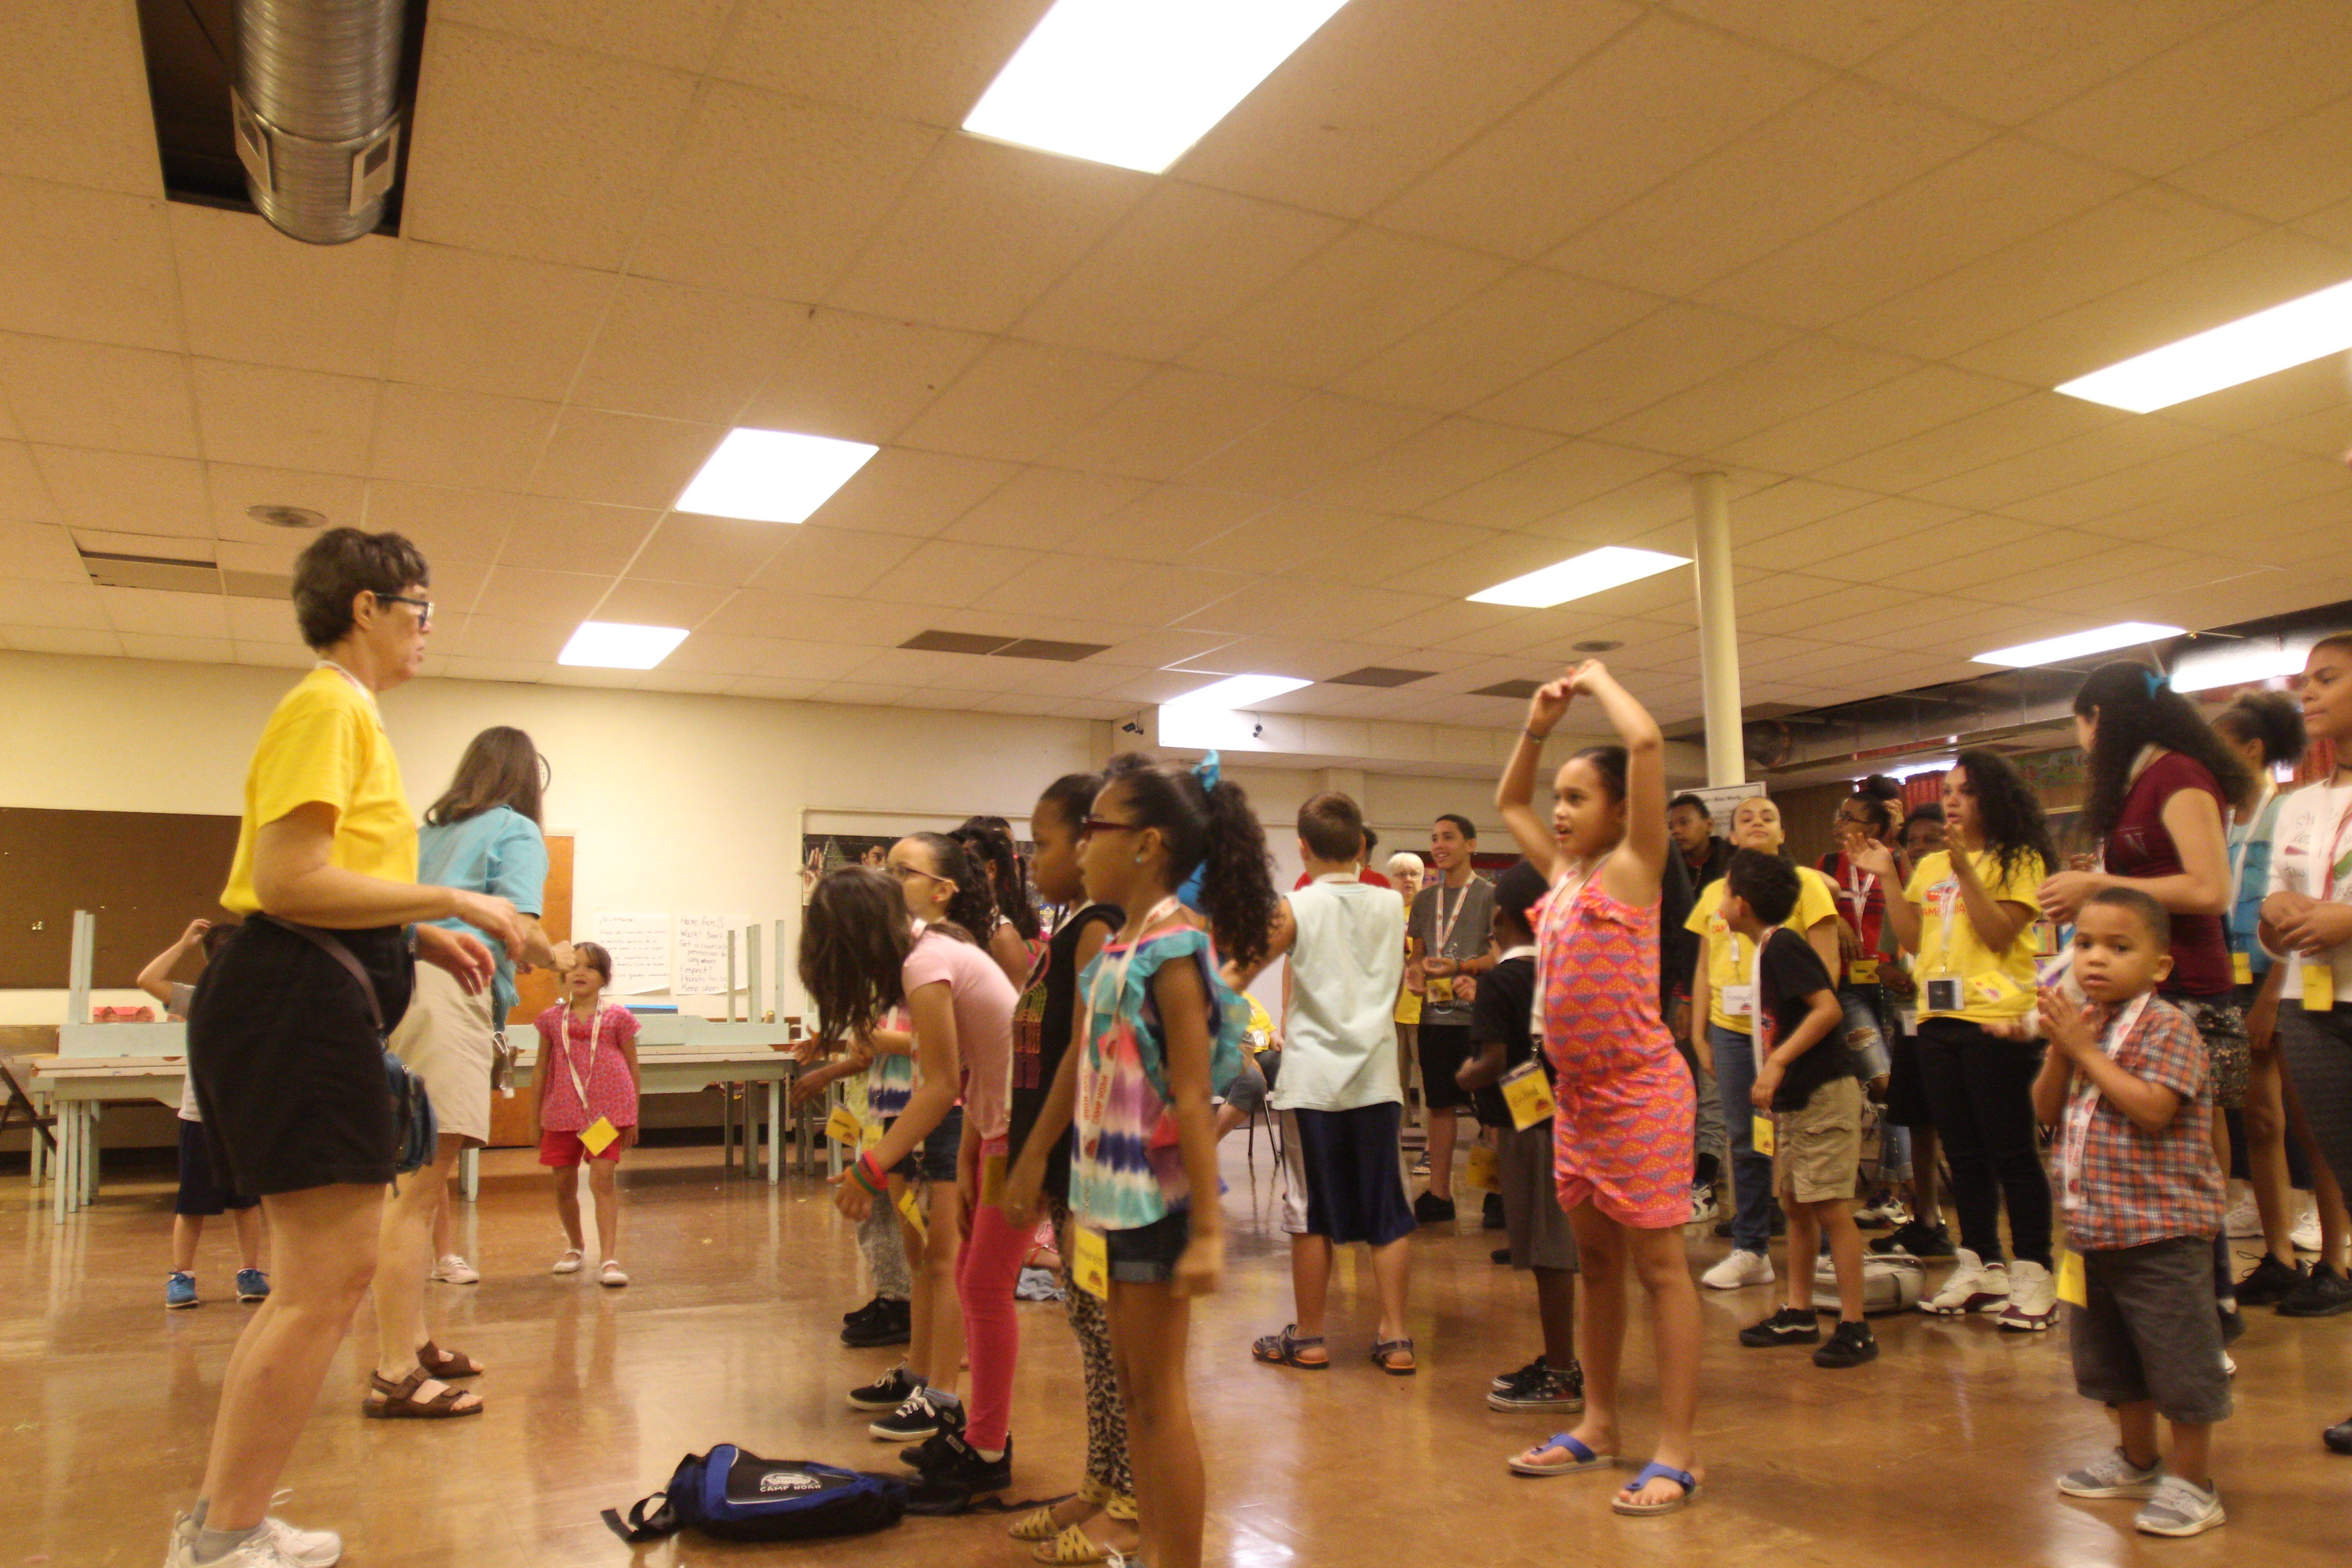 Around 37 children, many of whom were from families displaced by Hurricane Maria who evacuated to Pennsylvania, attended Liberty Lutheran churches' Camp Noah in Reading, PA, for a weeklong program in mid-August. Photo: Emily Neil / AL DÍA News
